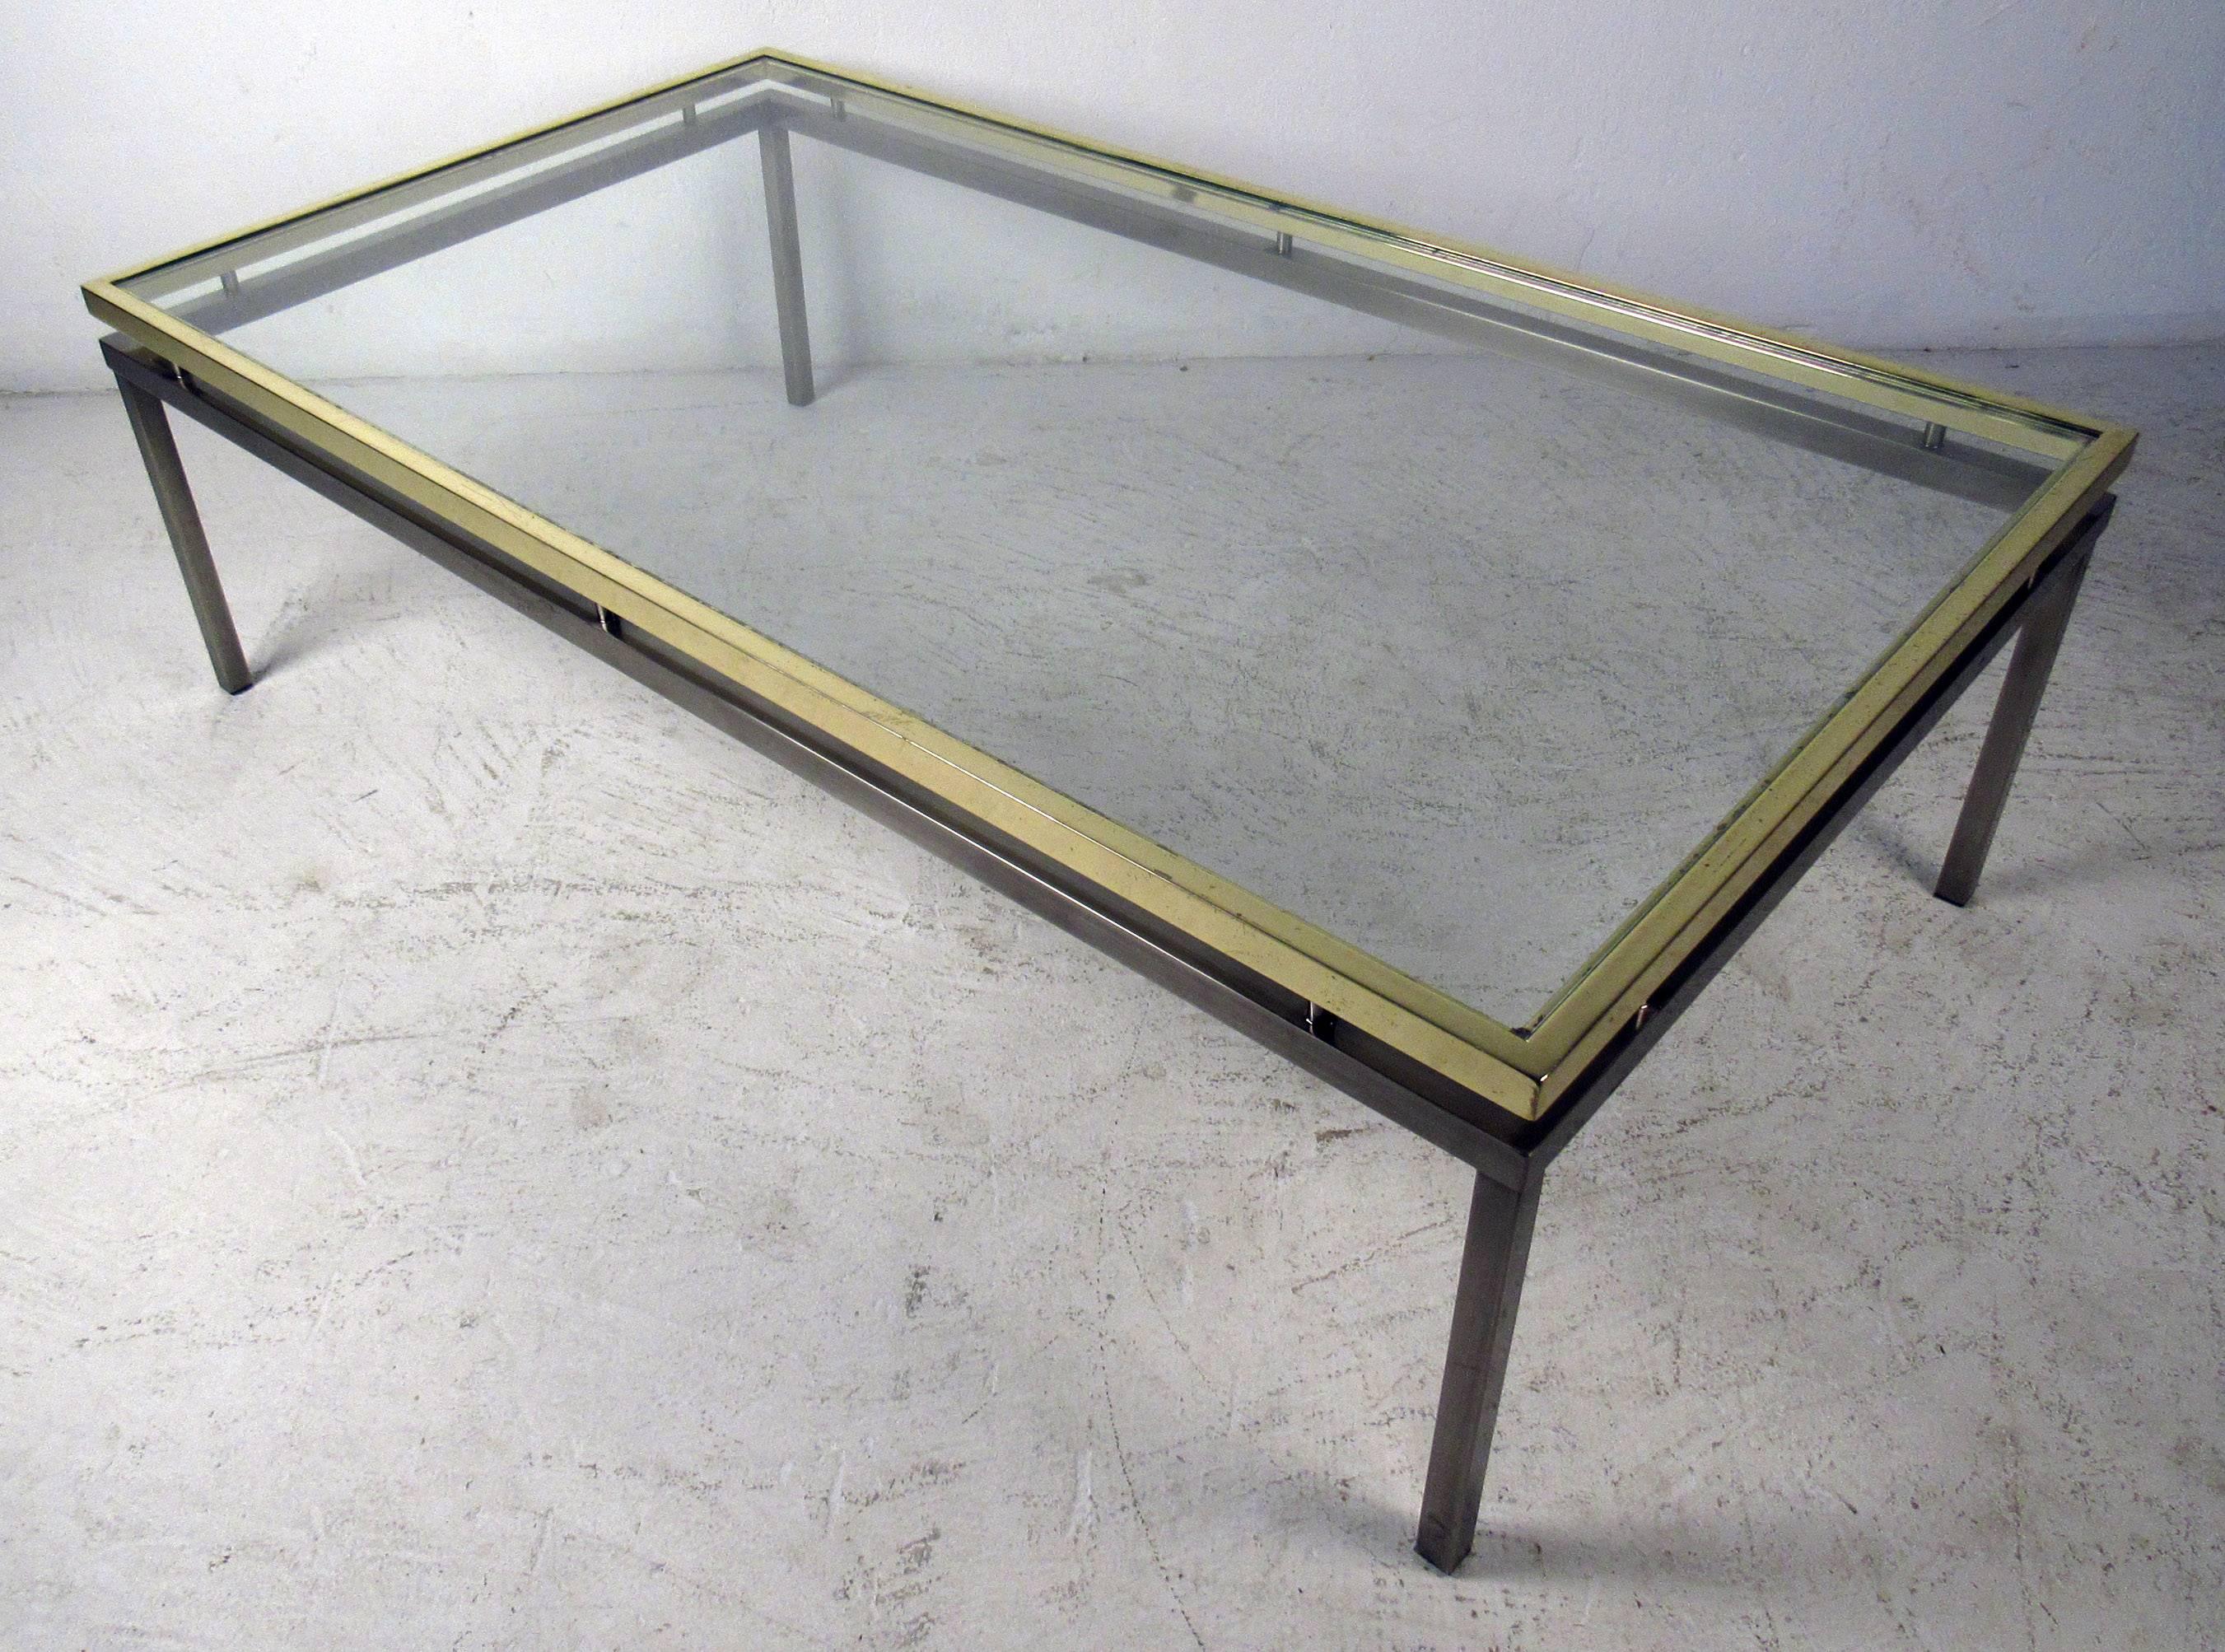 Mid-Century Modern coffee table featuring sturdy chrome and brass base with a glass top. A stylish two-tone piece with a slightly raised top and large rectangular glass. Designed by Mastercraft, this is the perfect vintage cocktail table for home or